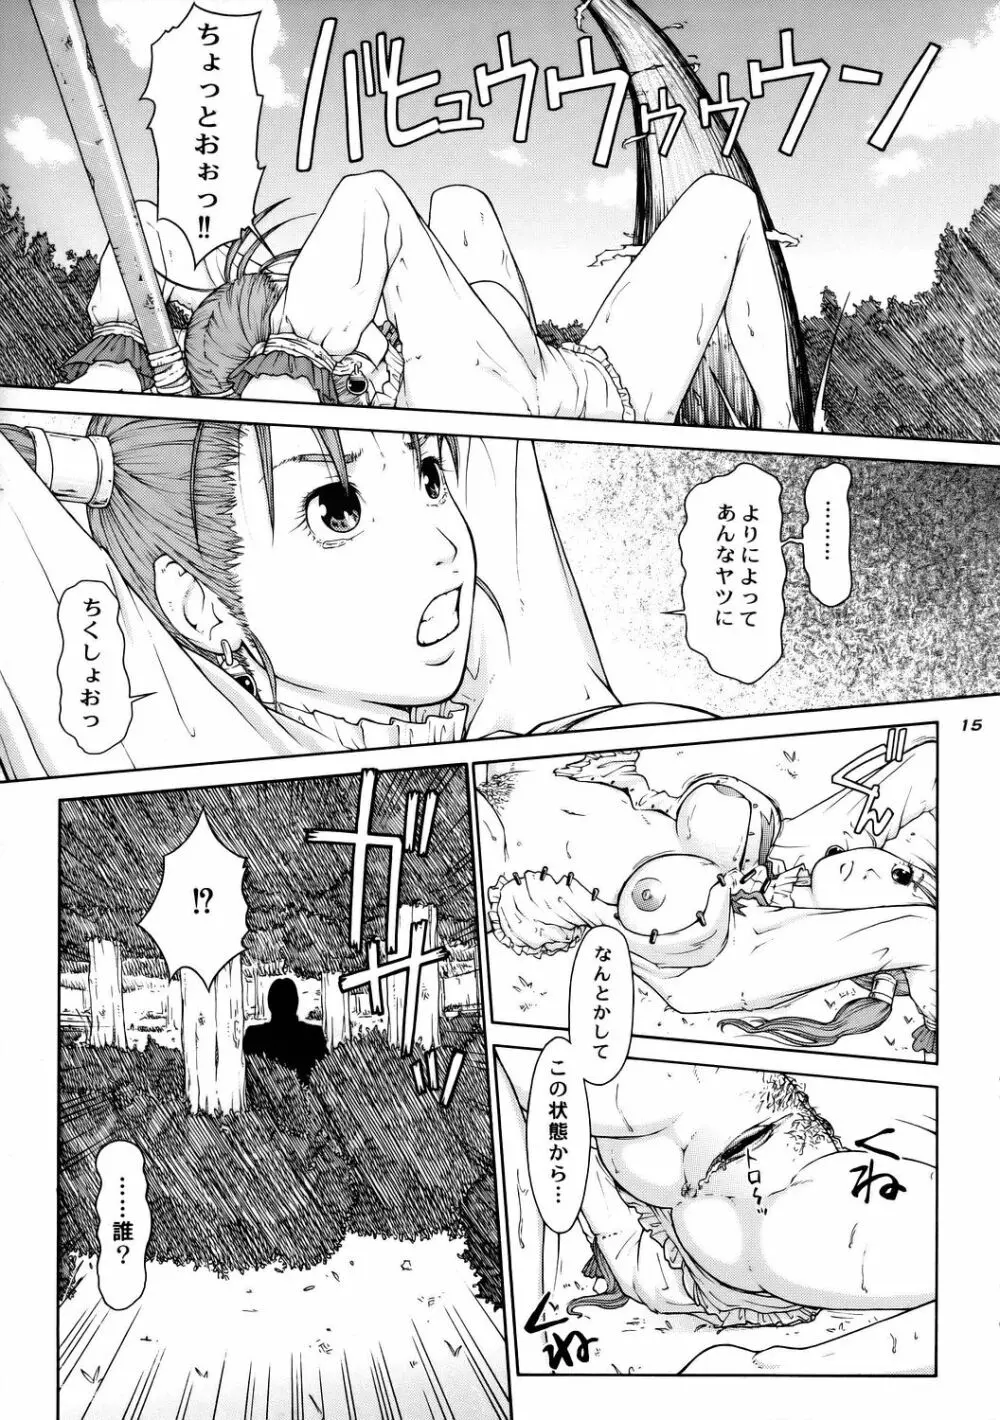 TWT 4 Page.14